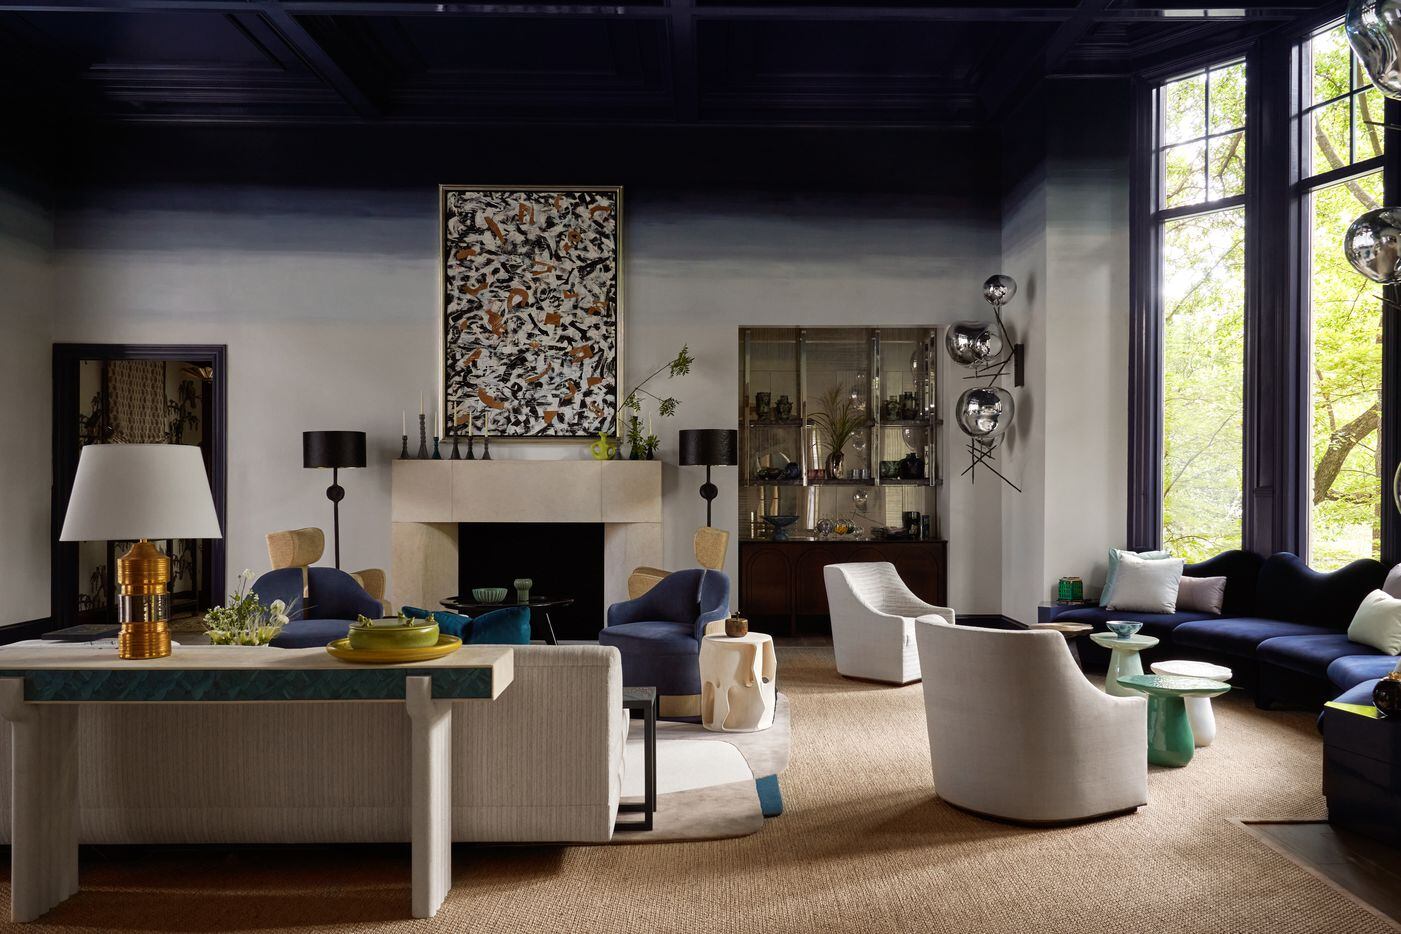 The family room in the 2022 Kips Bay Decorator Show House Dallas was designed by LC Studio.